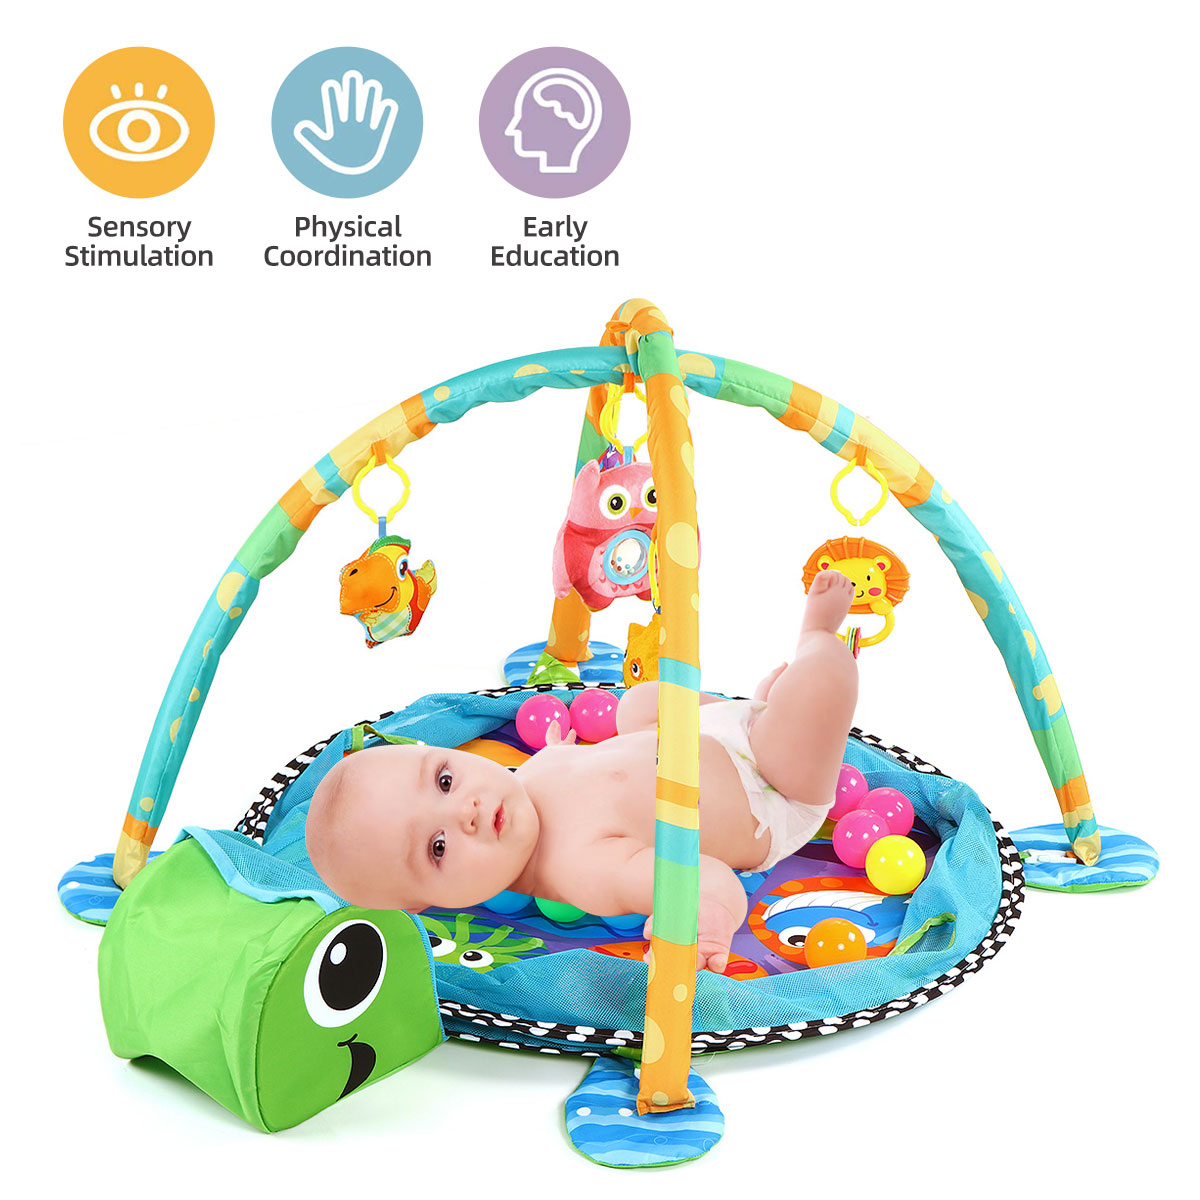 TEAYINGDE 3 in 1 Baby Gym Play Mat Baby Activity with Ocean Ball,Green Turtle - image 3 of 11